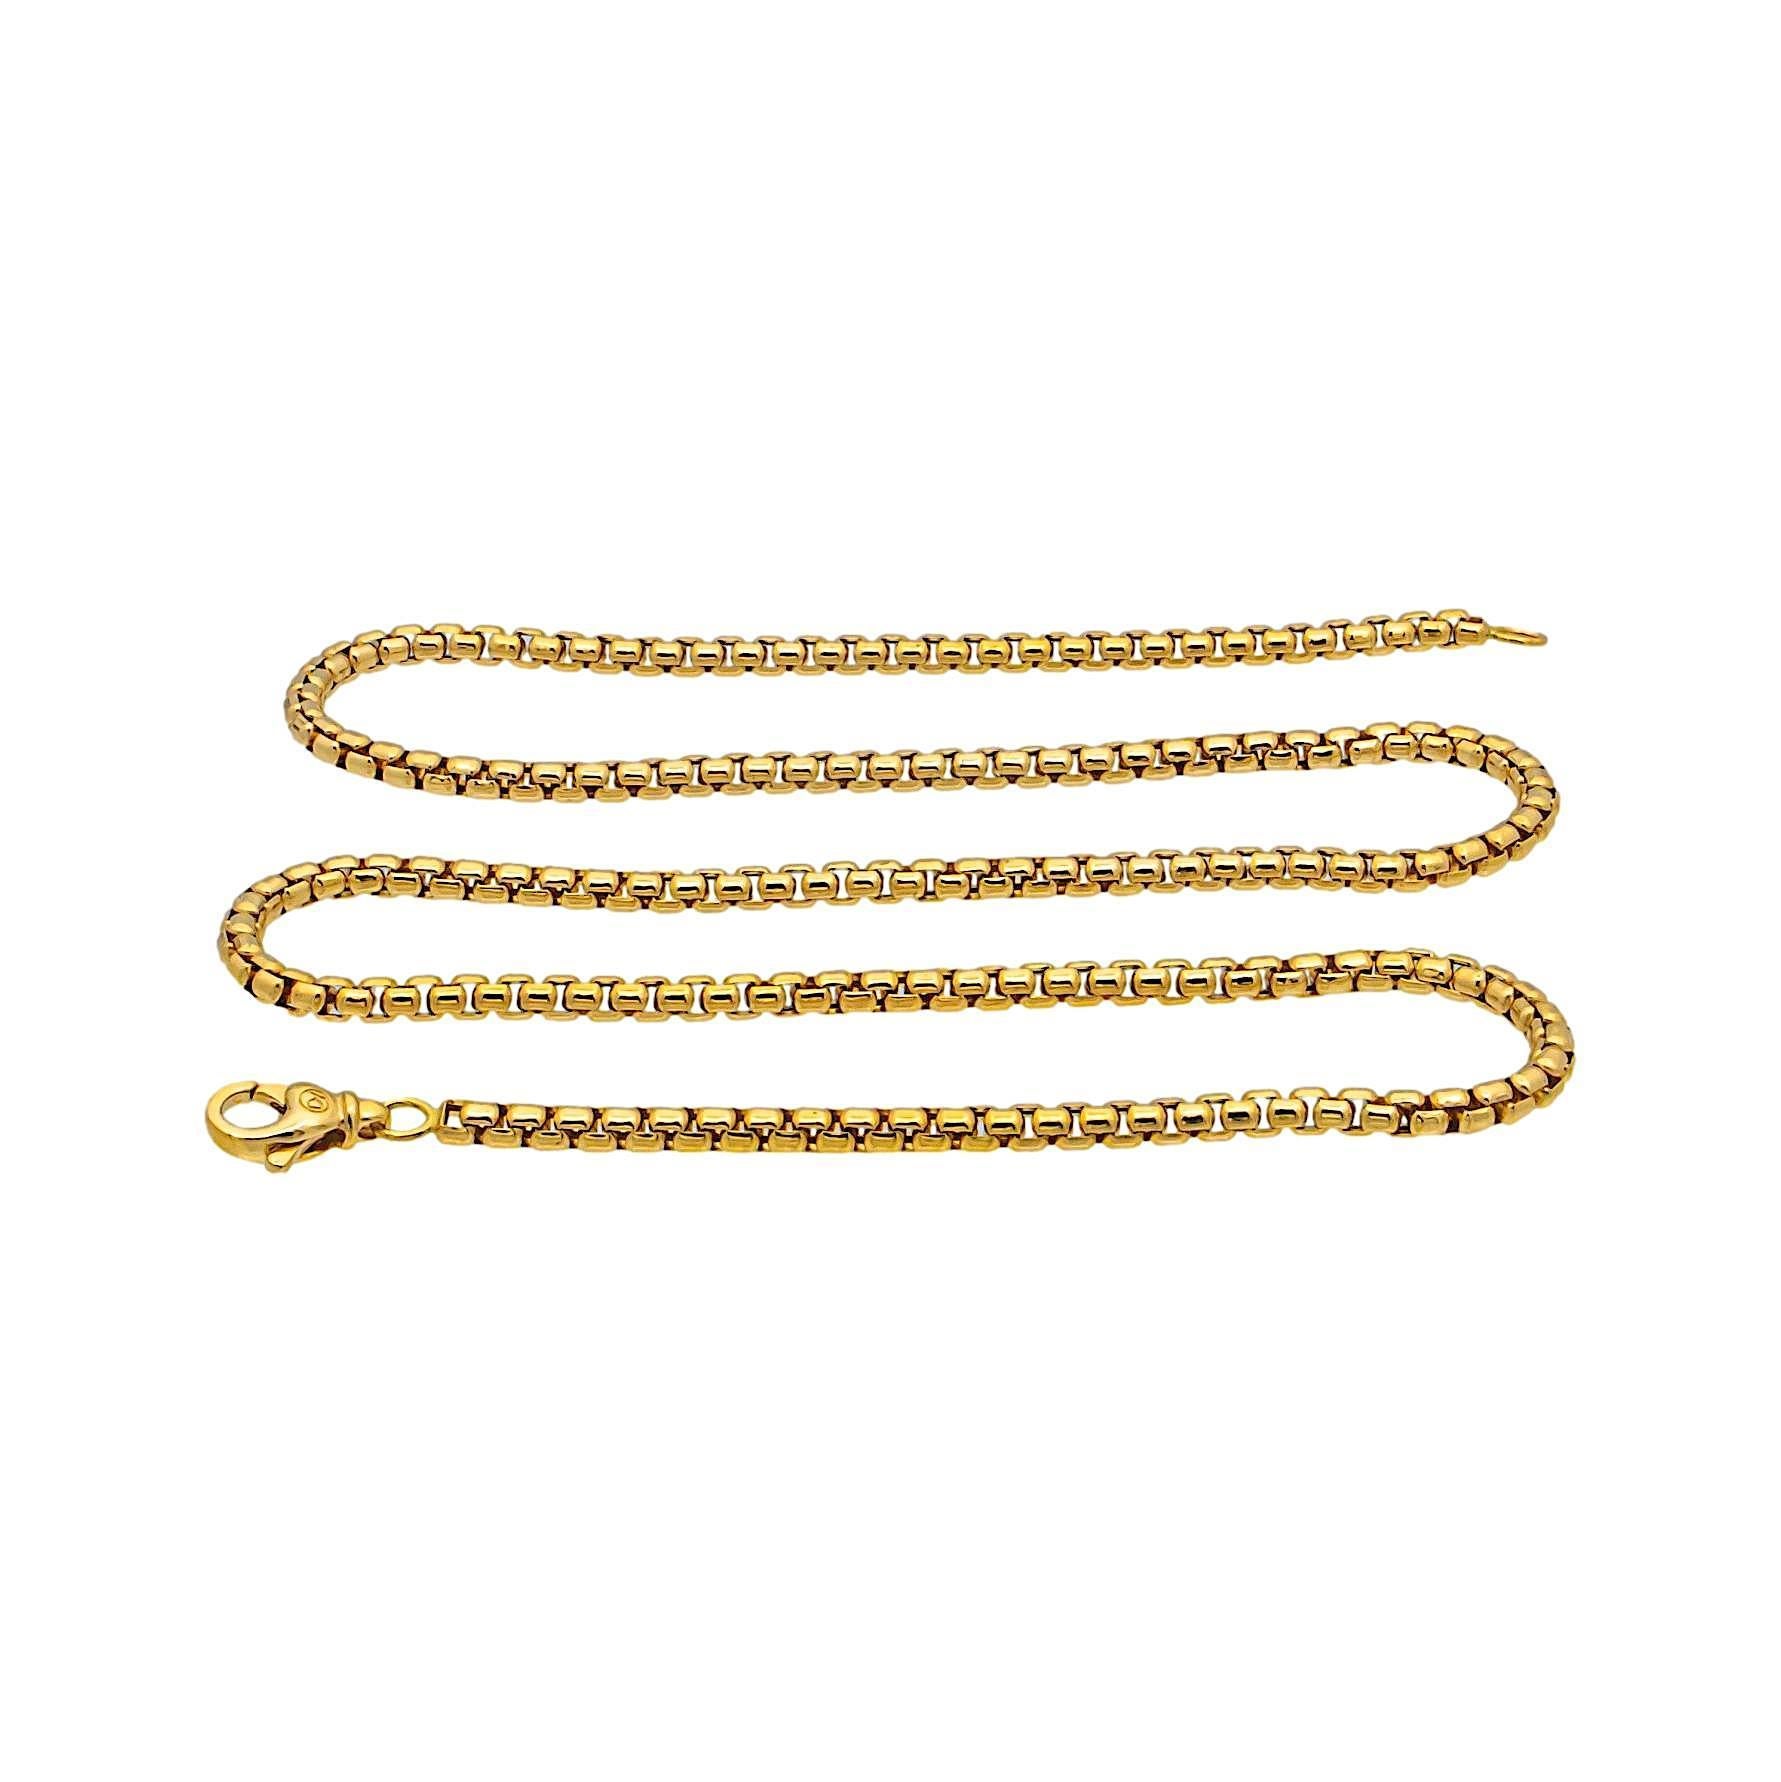 David Yurman necklace from the Chain collection for Men finely crafted in 18 karat yellow gold featuring a box link design measuring 3.4 mm wide and 22 inches long with a large lobster claw closure.  Fully hallmarked with logo and metal